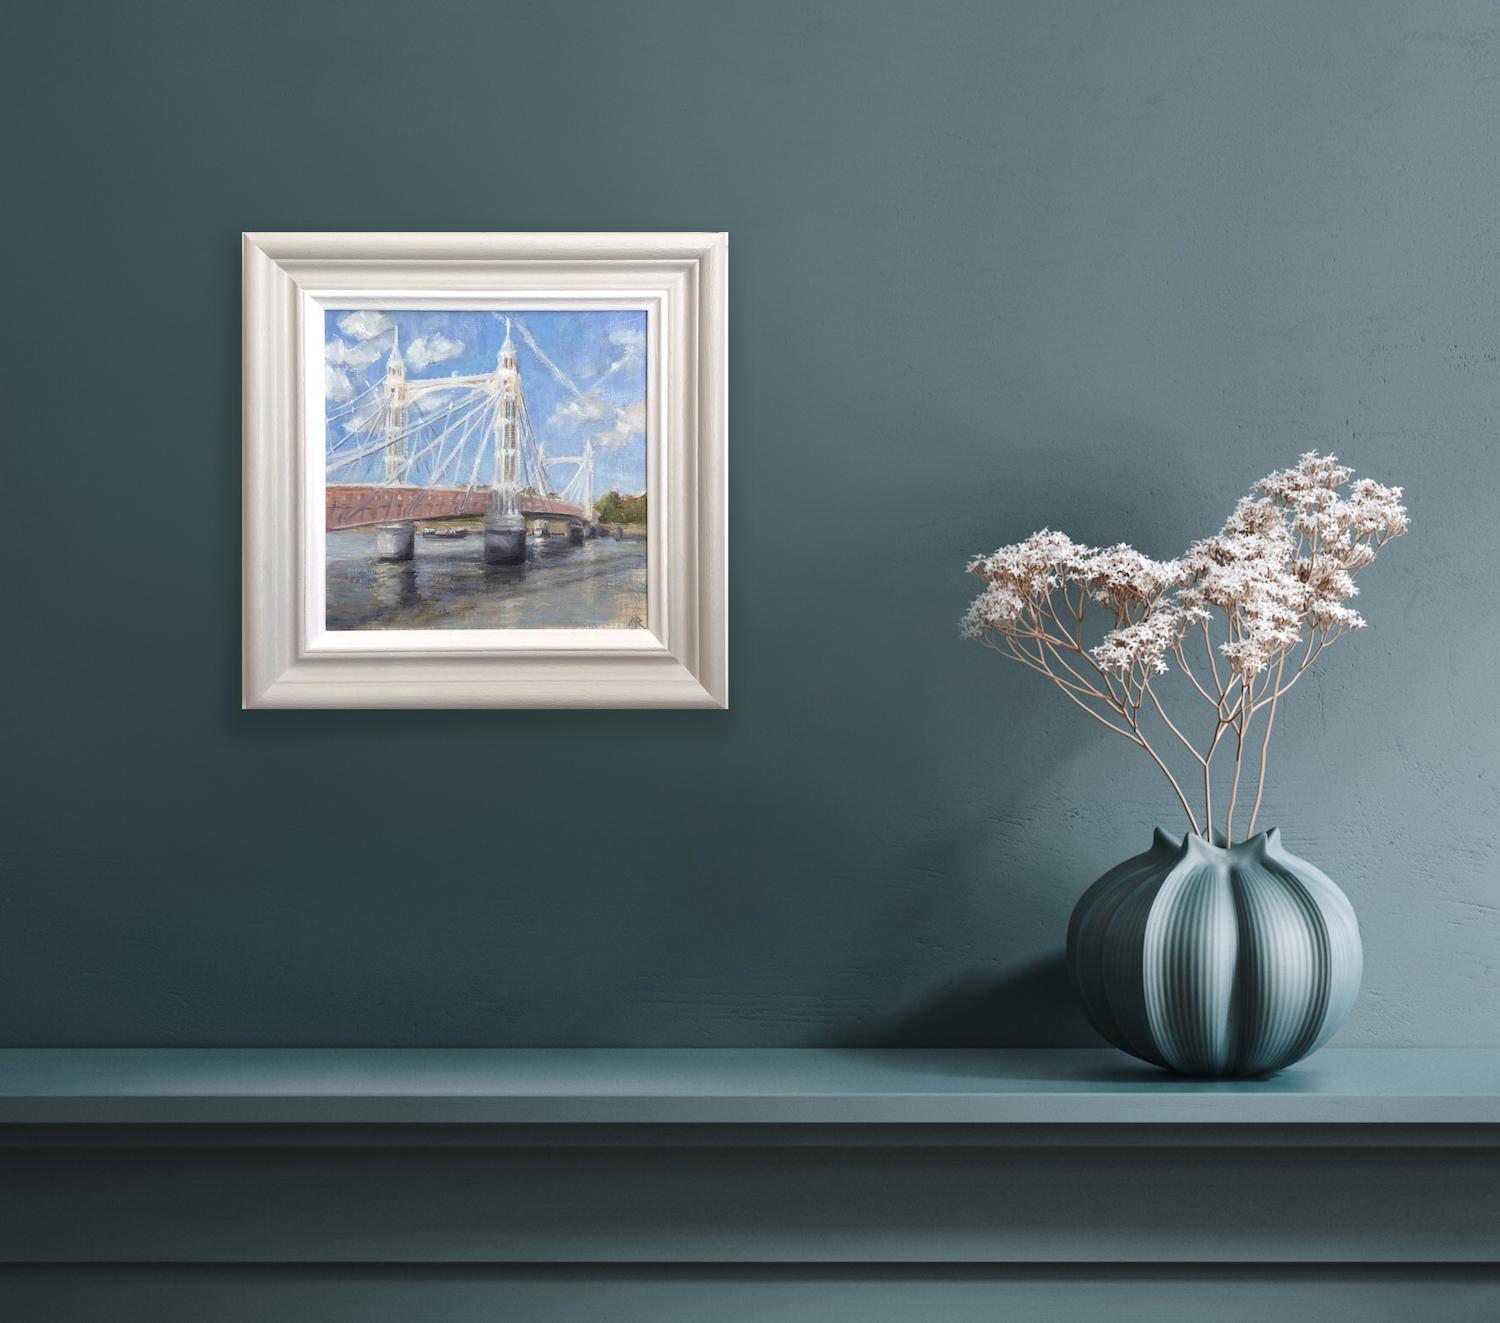 September Day, Albert Bridge [2022]
original
Oil paint on board
Image size: H:21 cm x W:21 cm
Complete Size of Unframed Work: H:21 cm x W:21 cm x D:0.5cm
Frame Size: H:30.5 cm x W:30.5 cm x D:2.5cm
Sold Framed
Please note that insitu images are